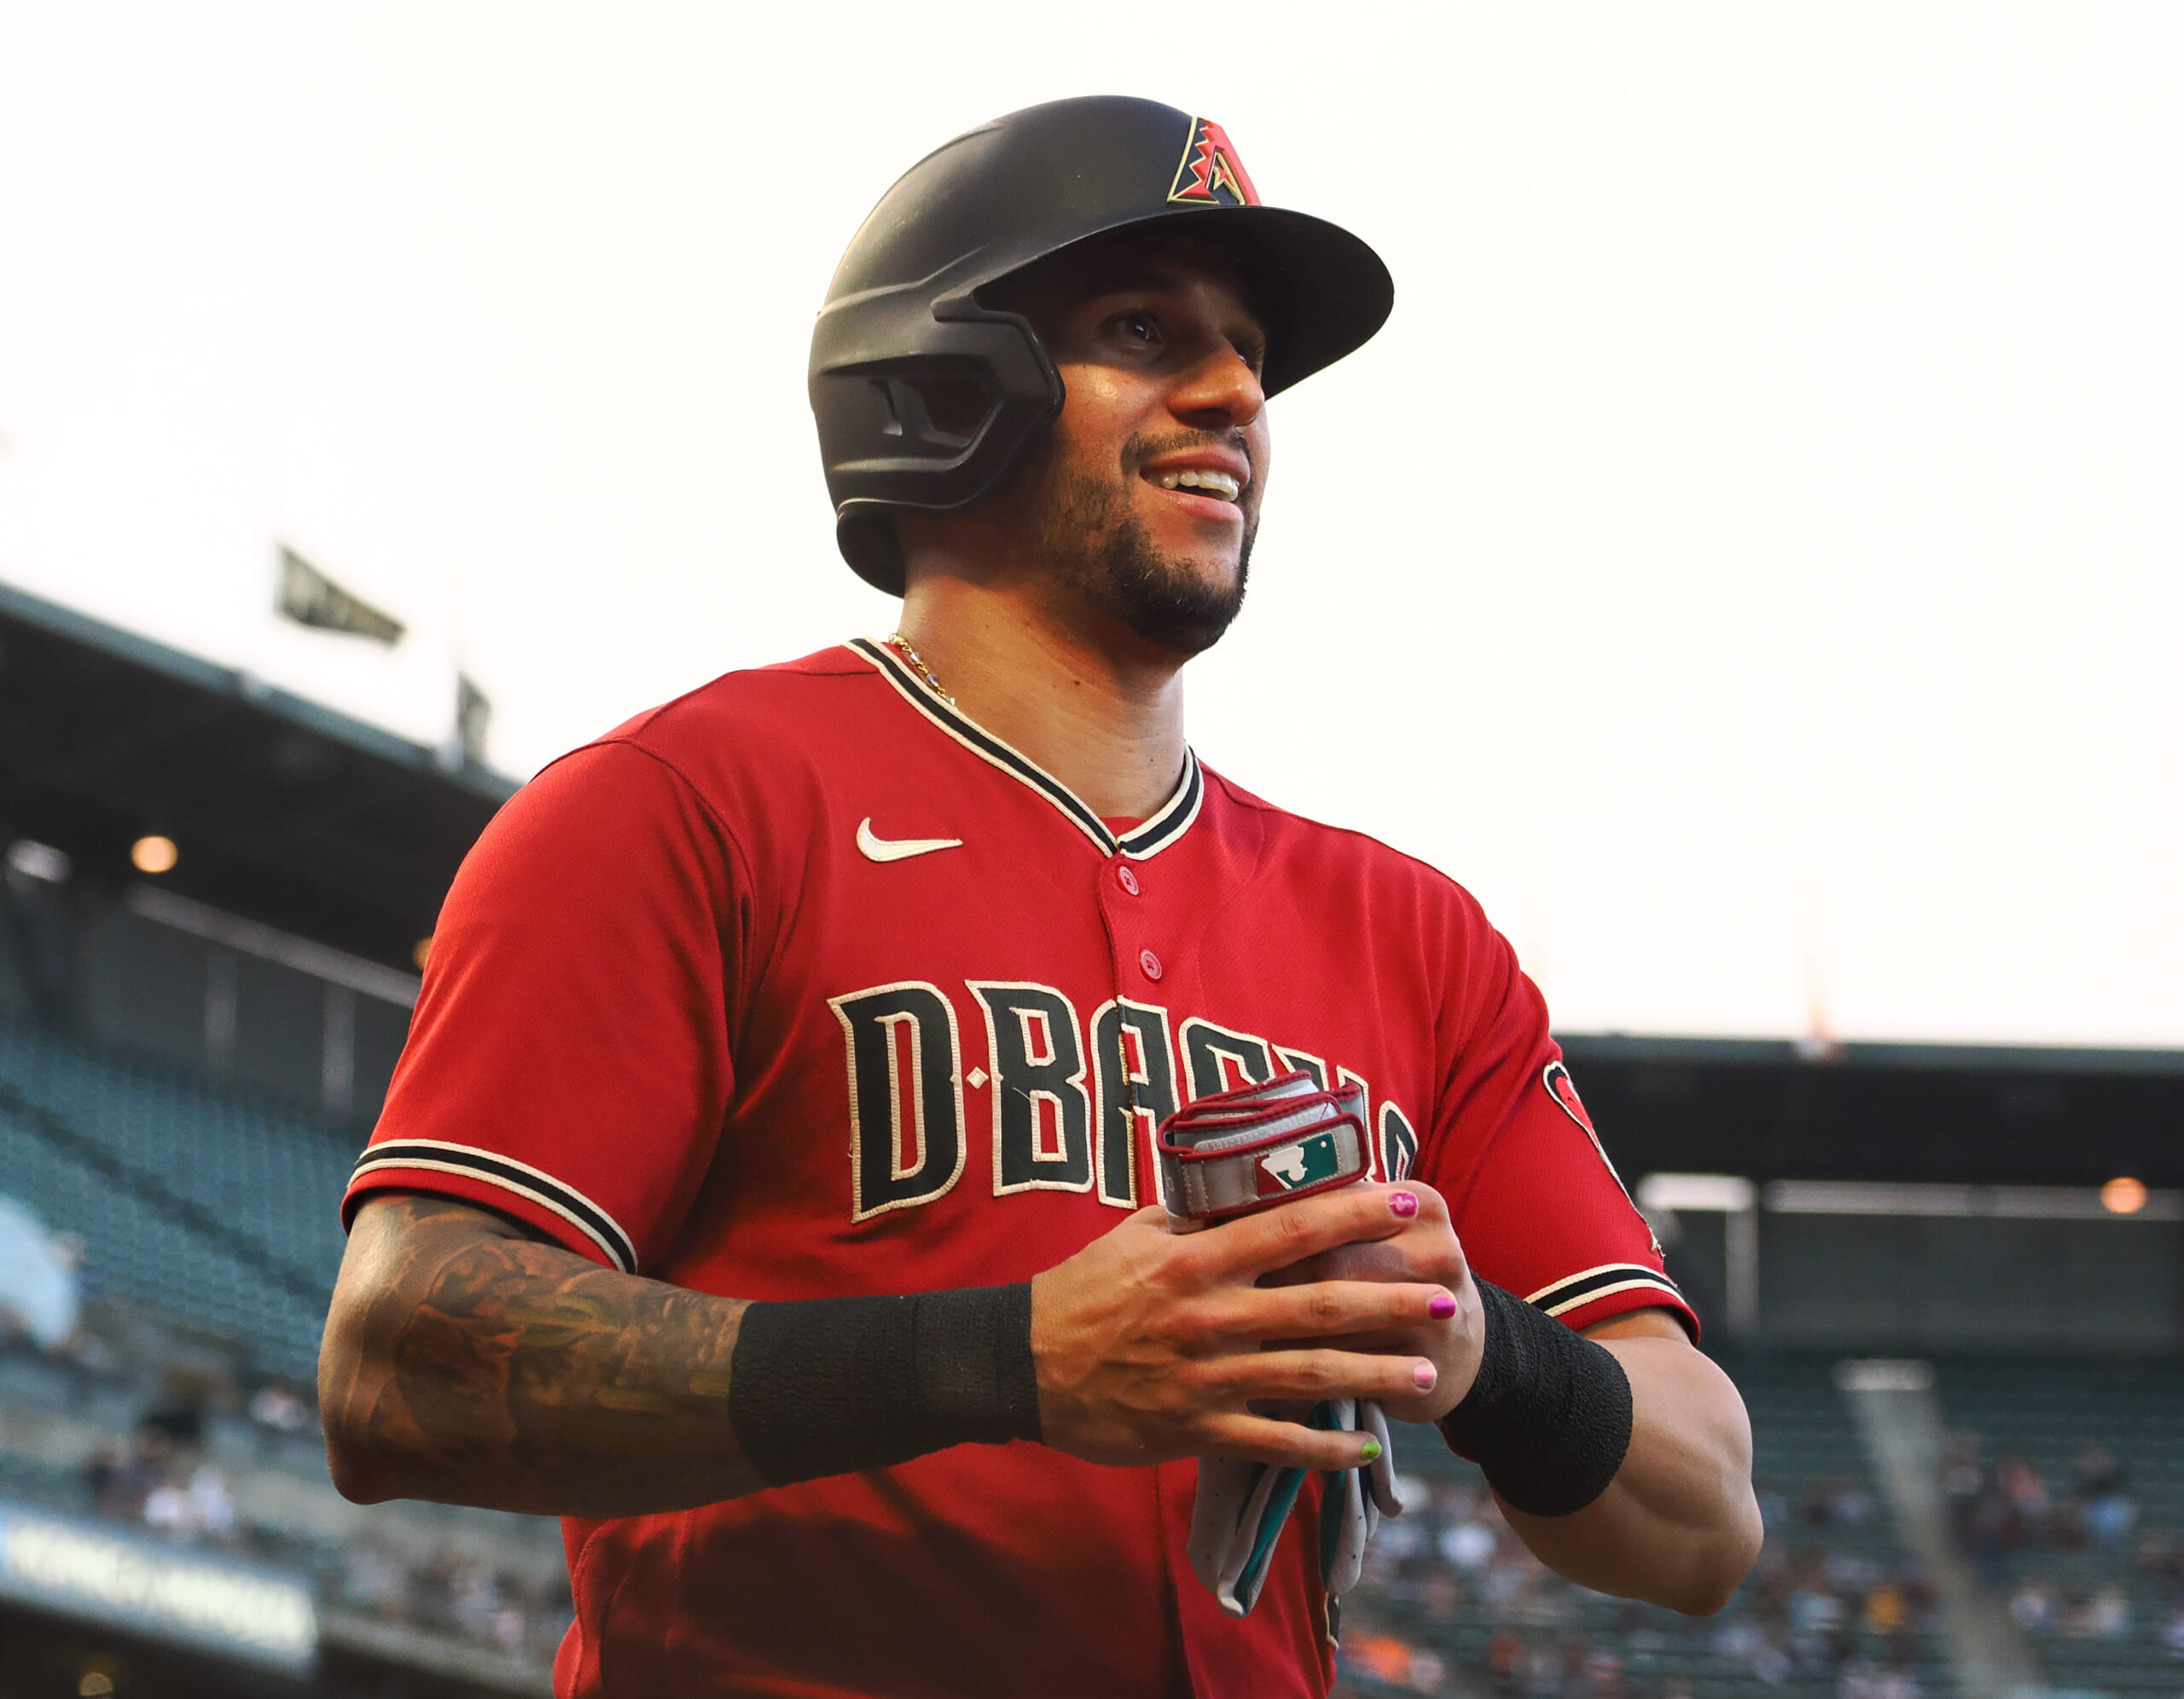 David Peralta - MLB Left field - News, Stats, Bio and more - The Athletic